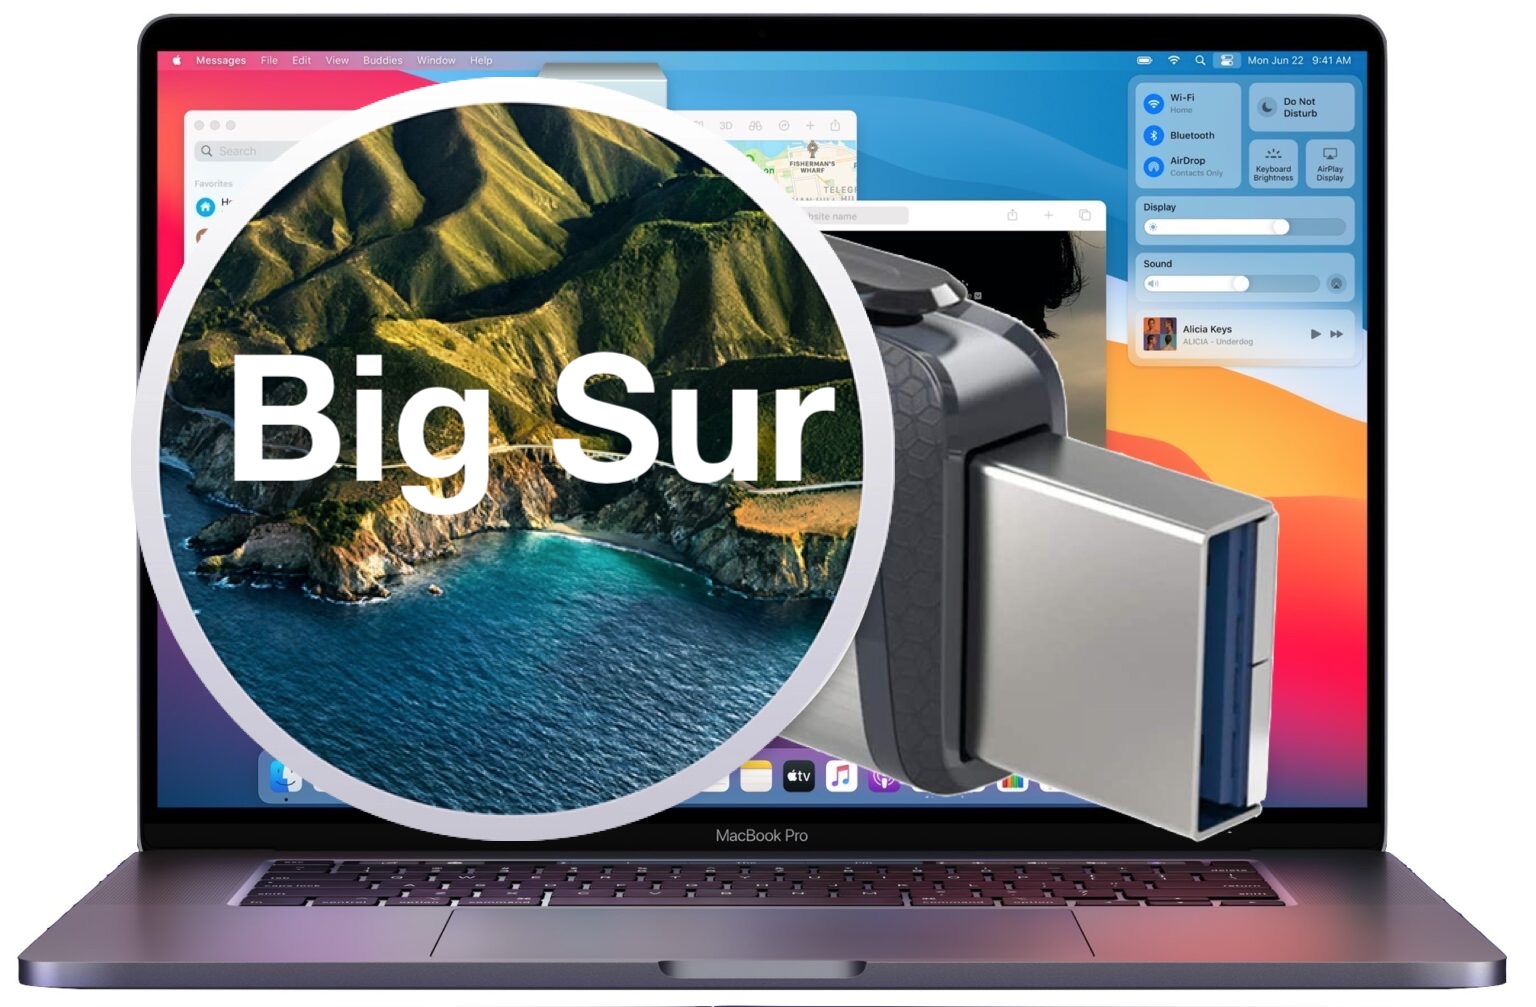 make usb boot drive for mac installers